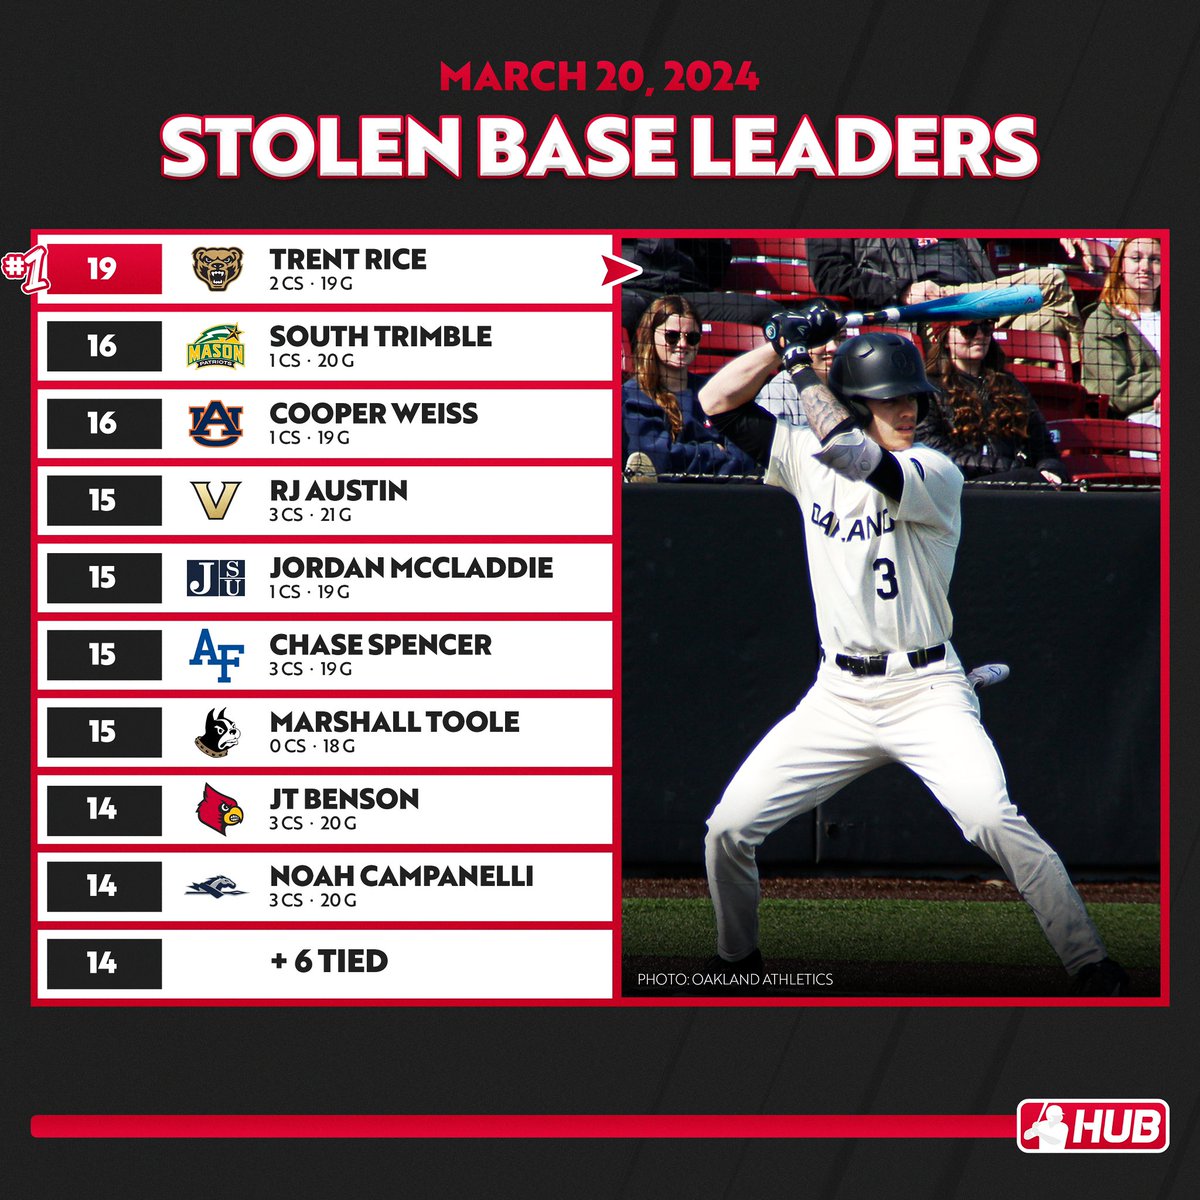 D1 stolen base leaders through games played on March 19th